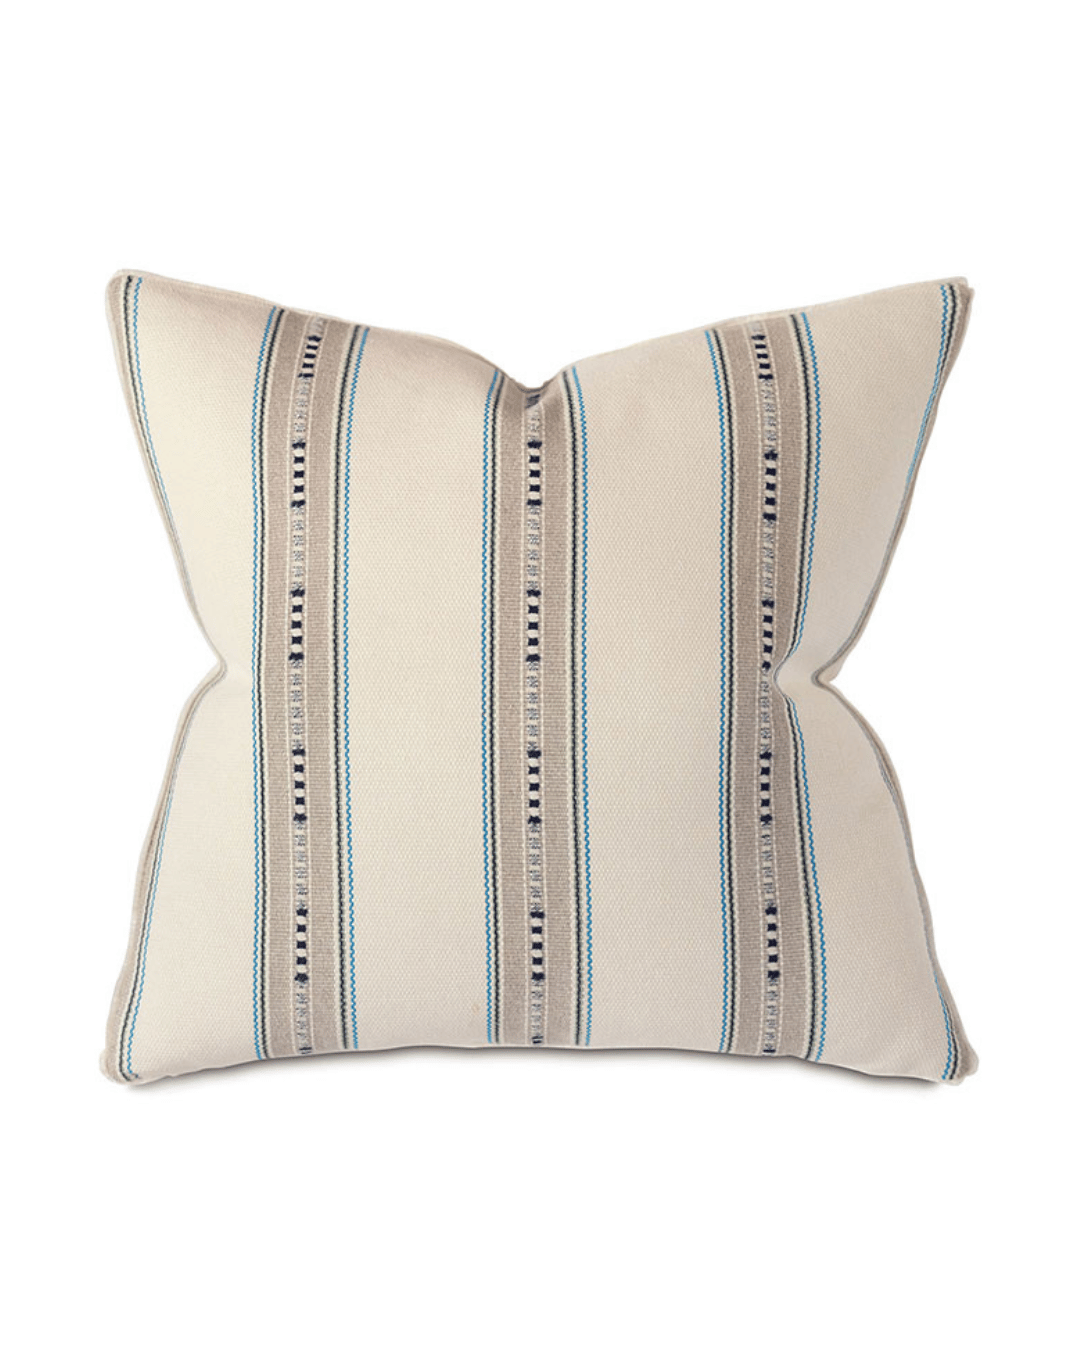 A decorative pillow with a cream base featuring horizontal stripes in neutral tones and subtle blue accents, designed in a Bungalow style with a unique X-shape contour, Eastern Accents EMERSON STRIPED EURO SHAM.